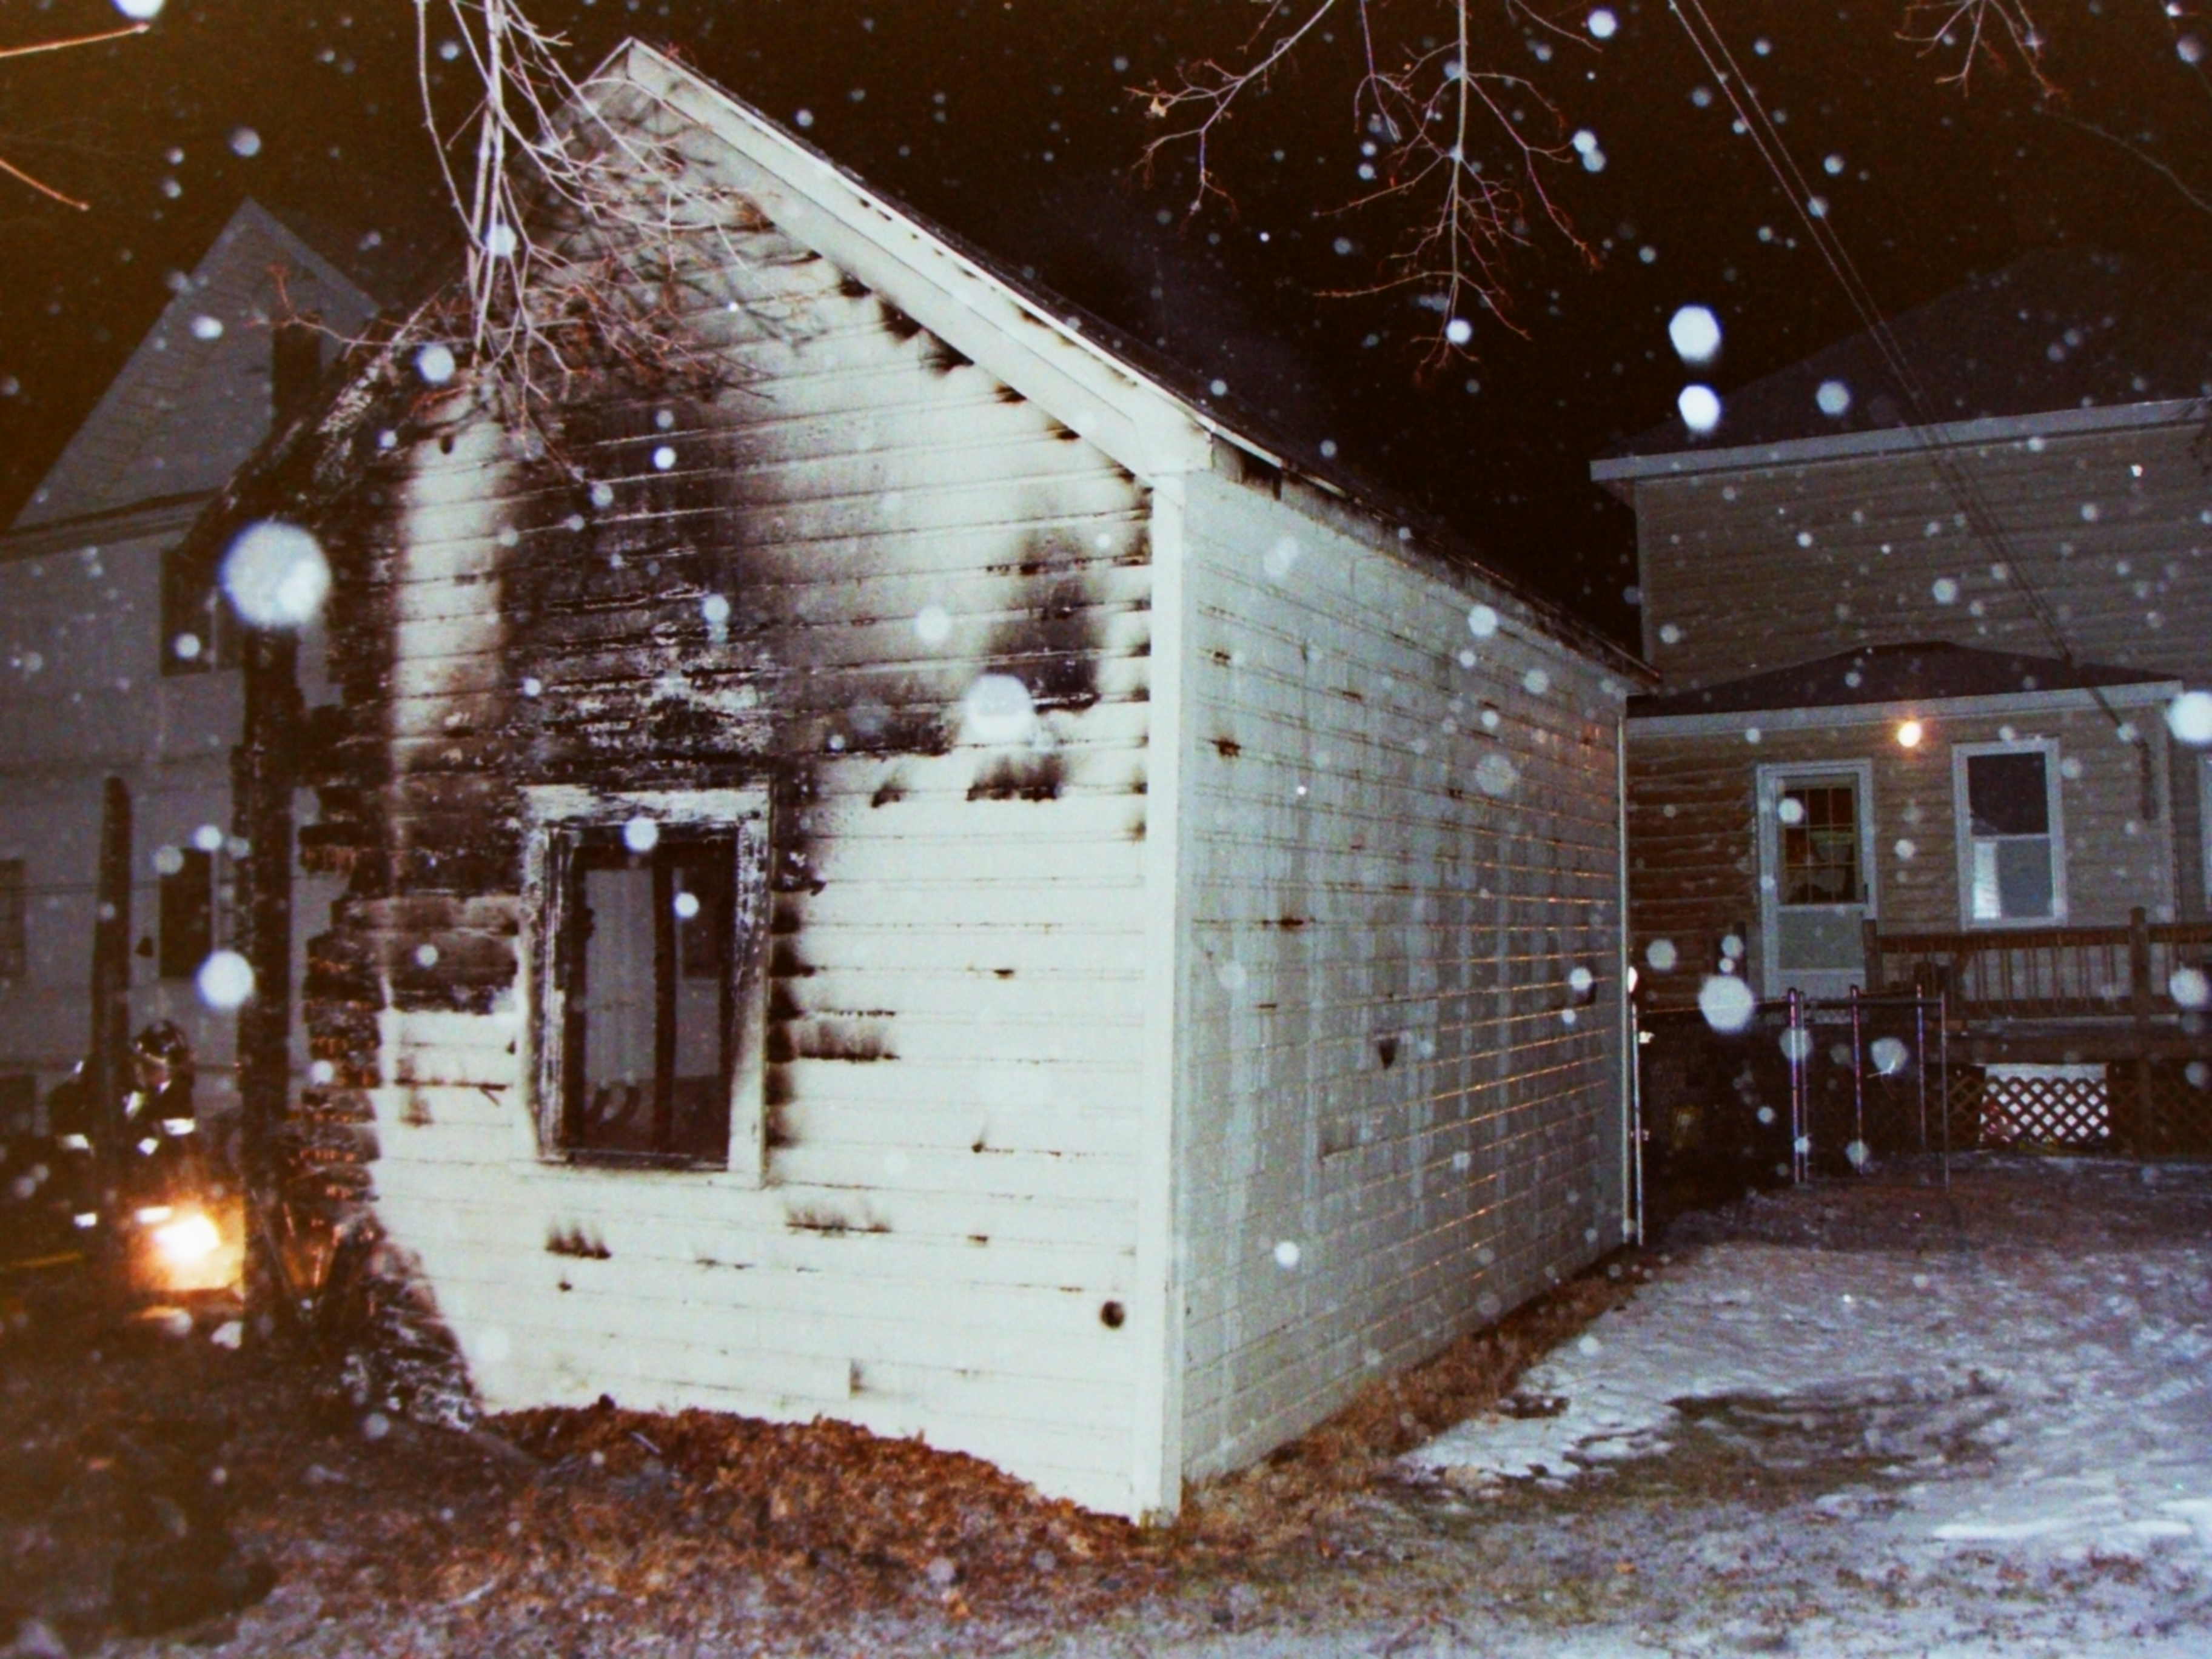 01-20-92  Other - Endwell Fire